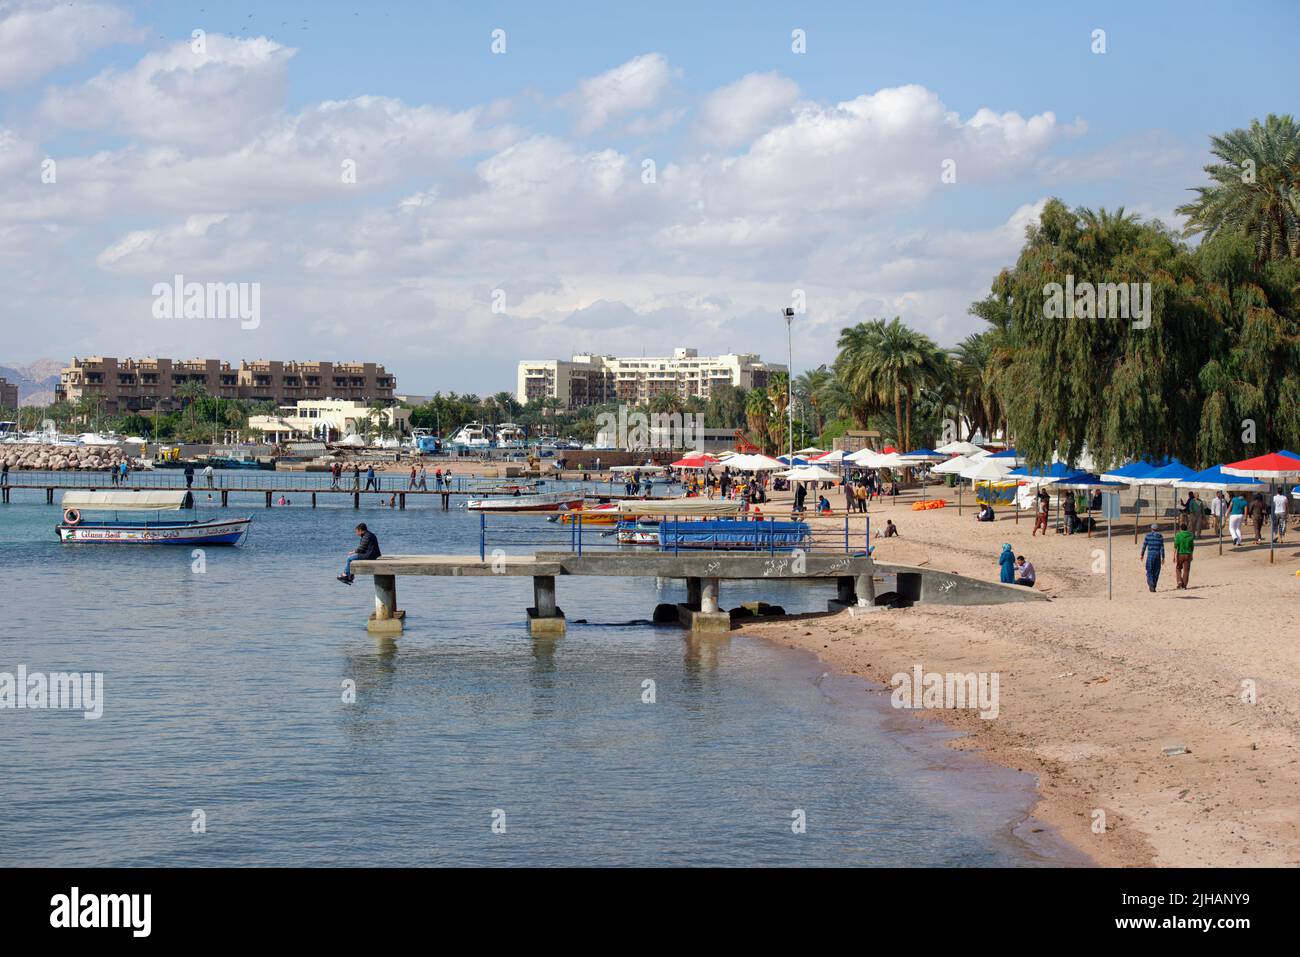 Aqaba, Jordan - March 14, 2014: Boats on the beach of Aqaba in springtime. Glass bottom boats allow tourists to see corals and fishes Stock Photo